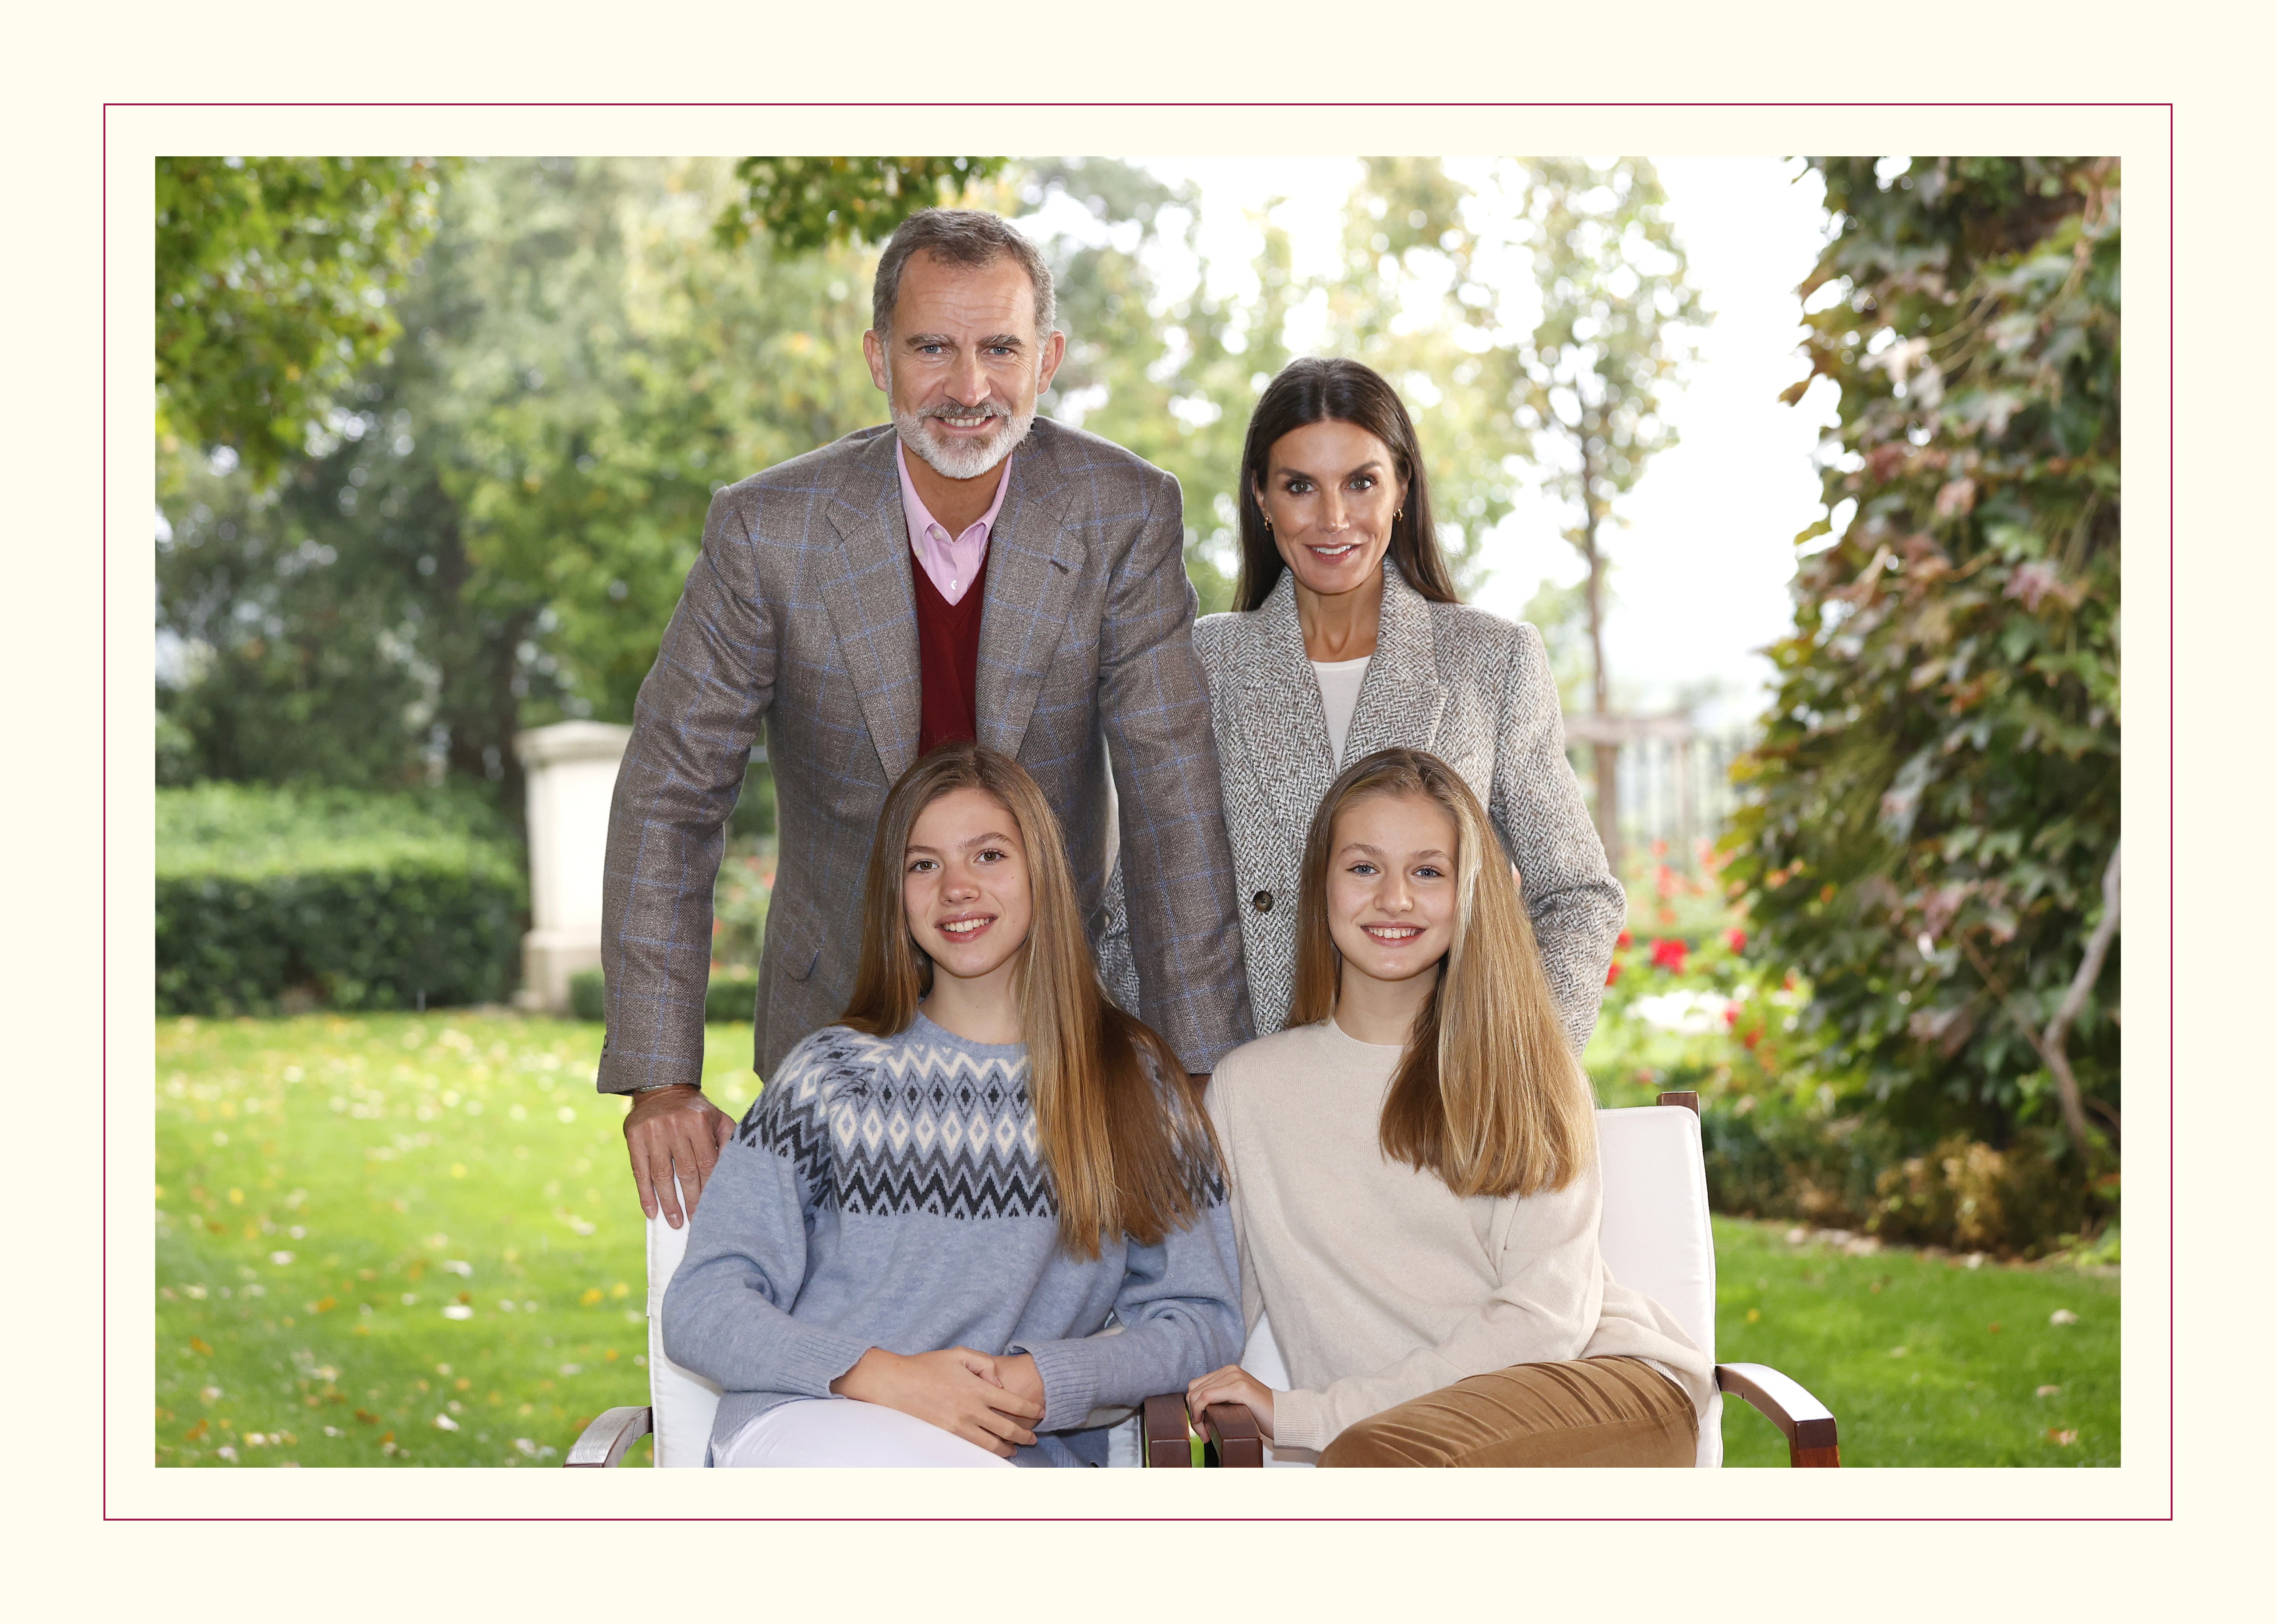 The Royal Christmas Card featuring a photograph of King Felipe VI of Spain with Queen Letizia of Spain and their children Crown Princess Leonor of Spain and Princess Sofia of Spain on December 16, 2021 in Madrid, Spain. / Source: Getty Images